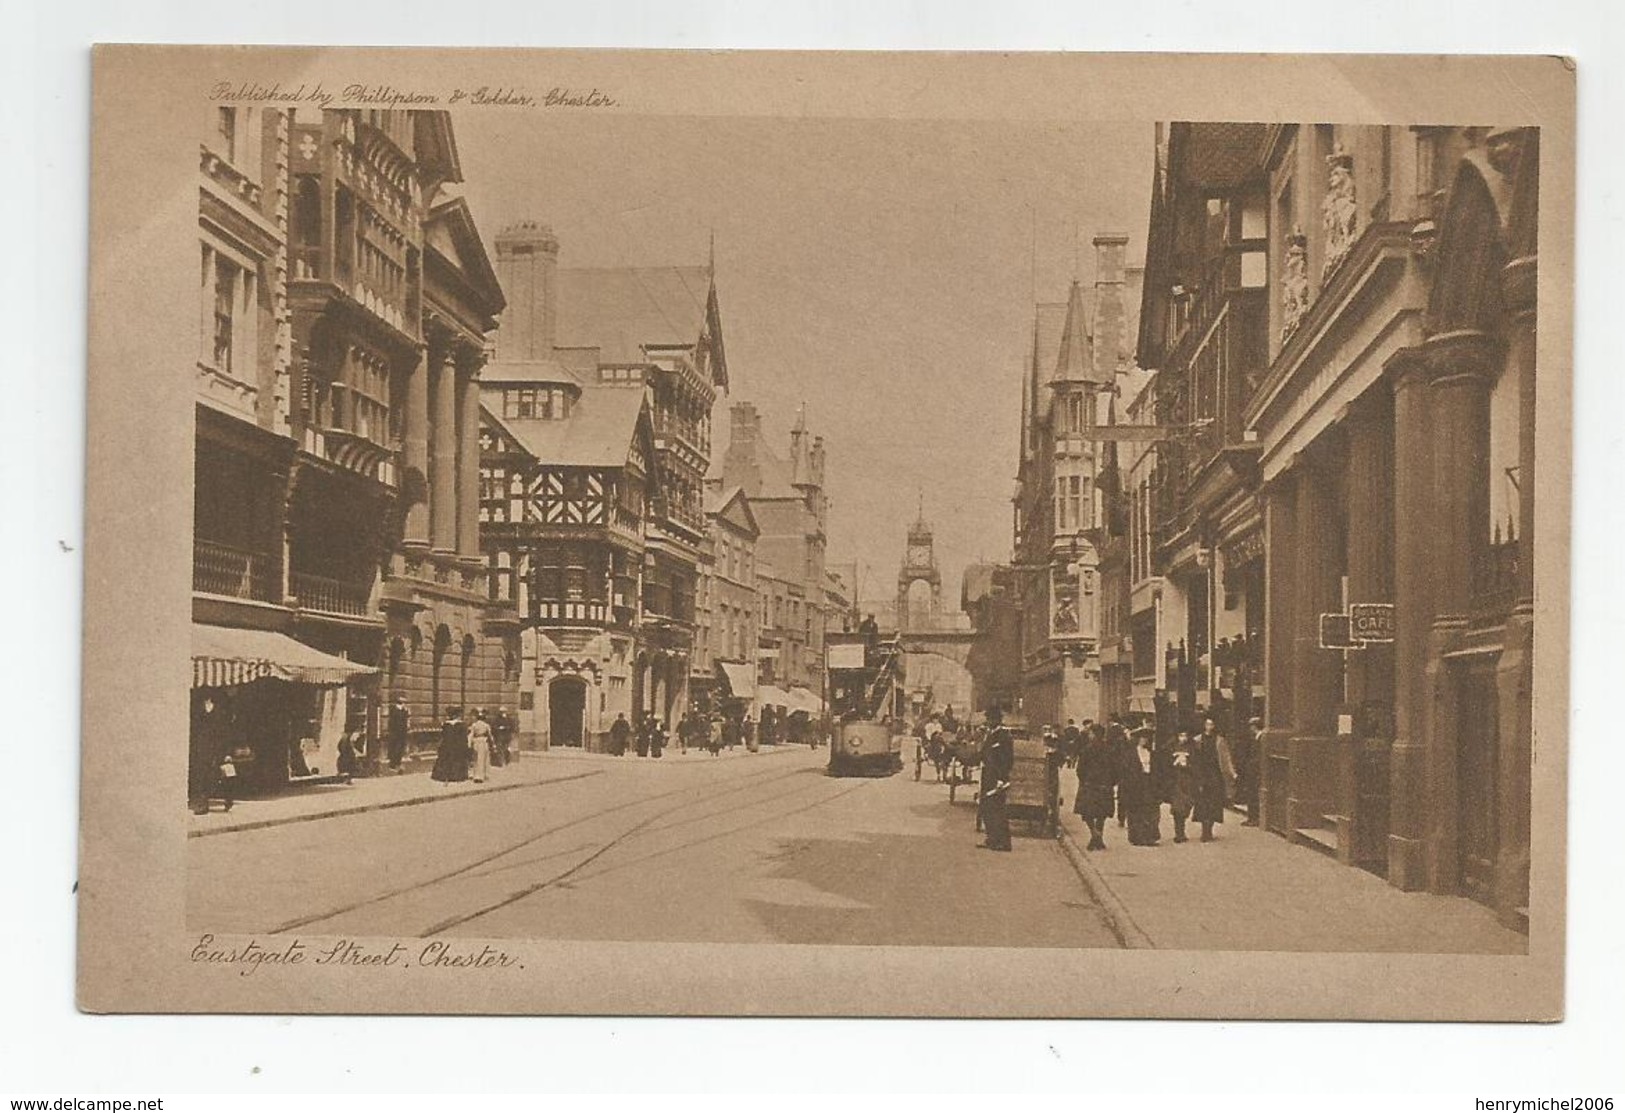 Angleterre England Chester Eastgate Street Tramway - Chester